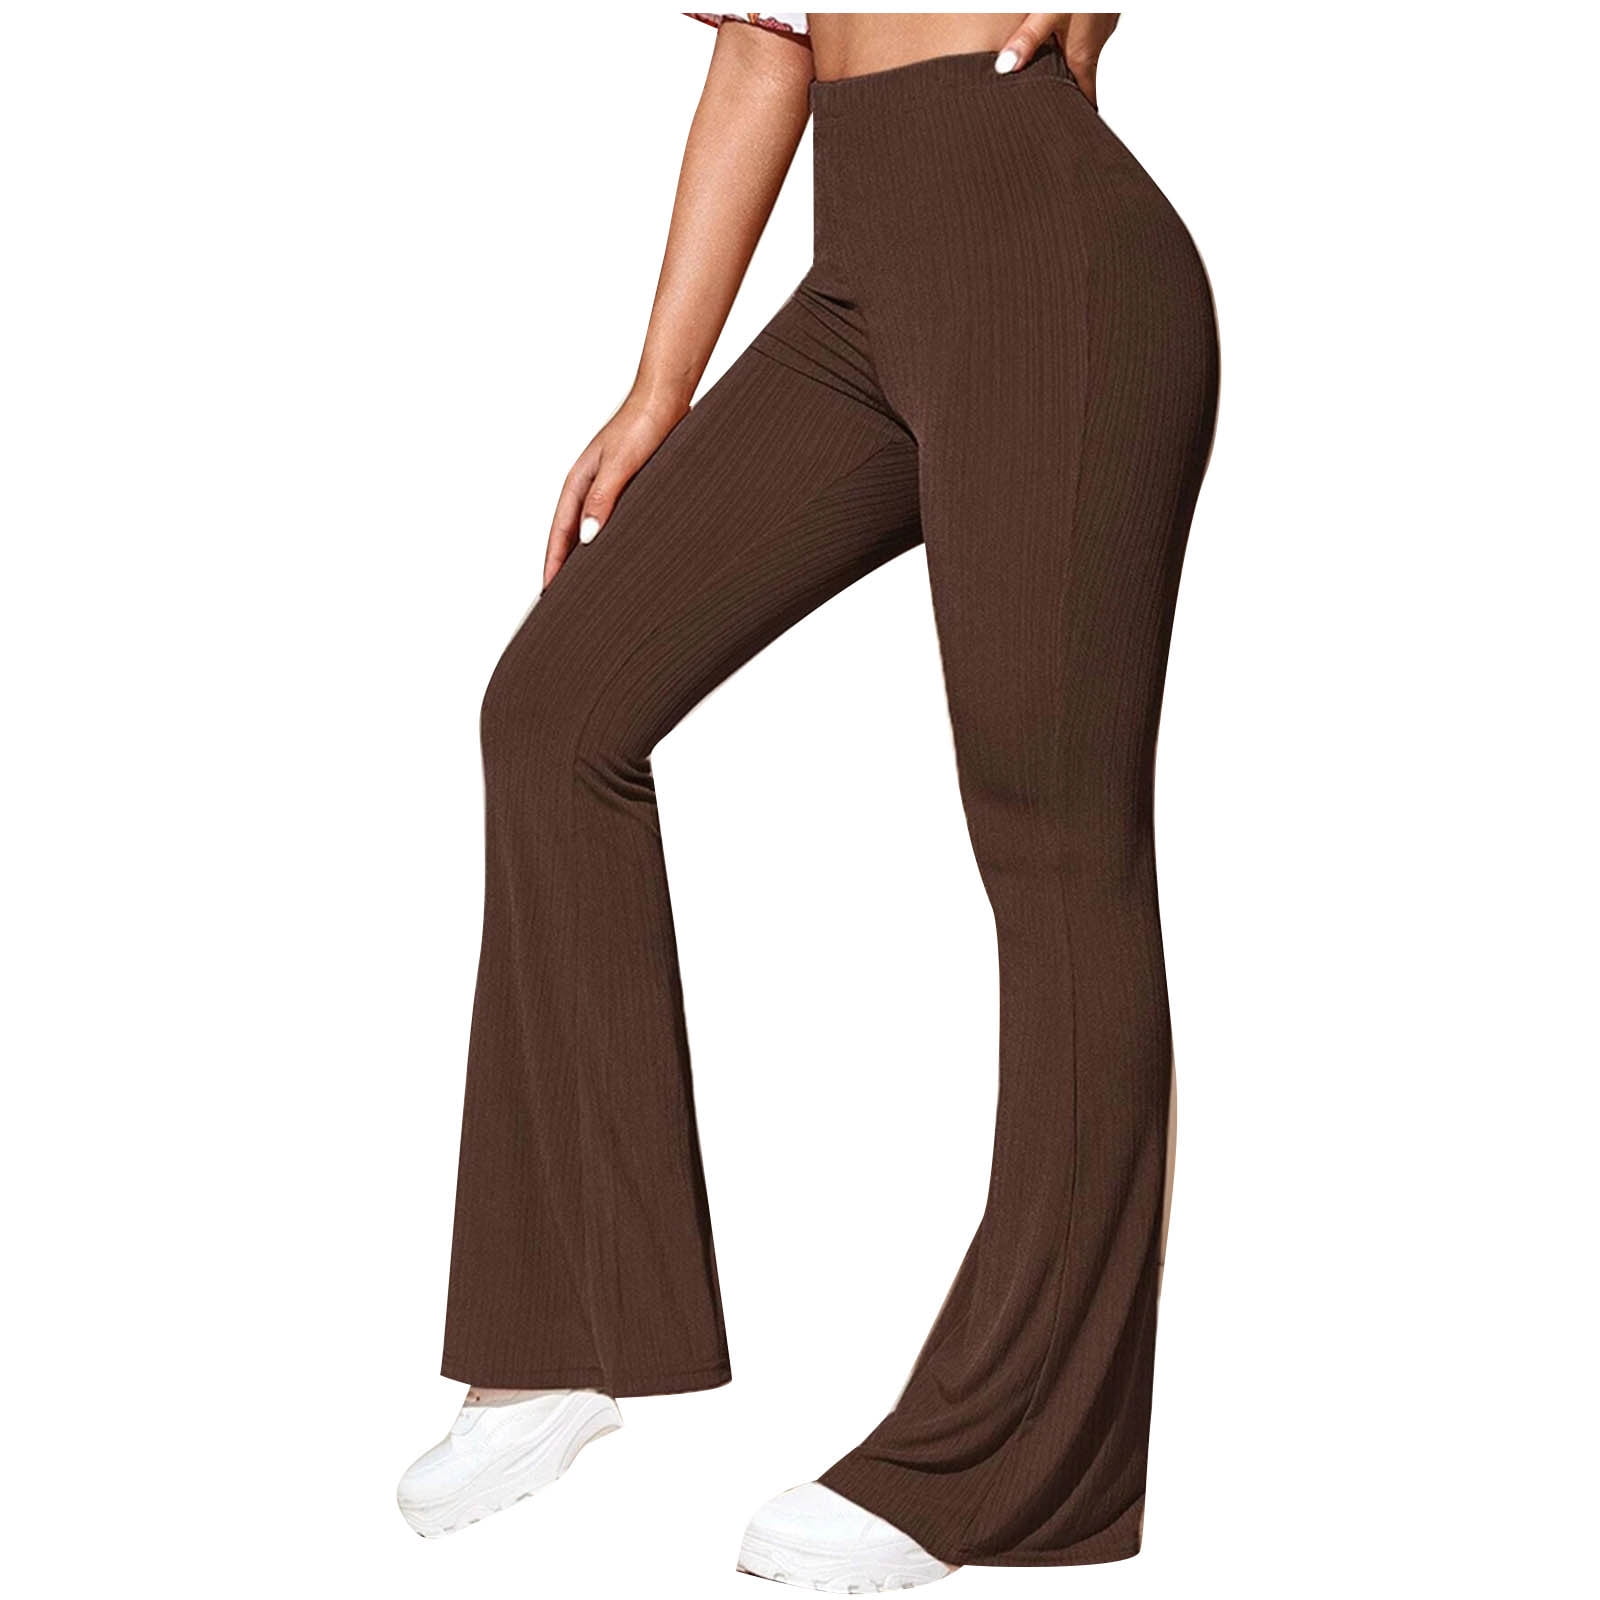 RYRJJ Flare Legging for Women High Waisted Butt Lifiting Bootcut Ribbed  Knit Yoga Pants Workout Gym Bell Bottom Trousers(Brown,S)